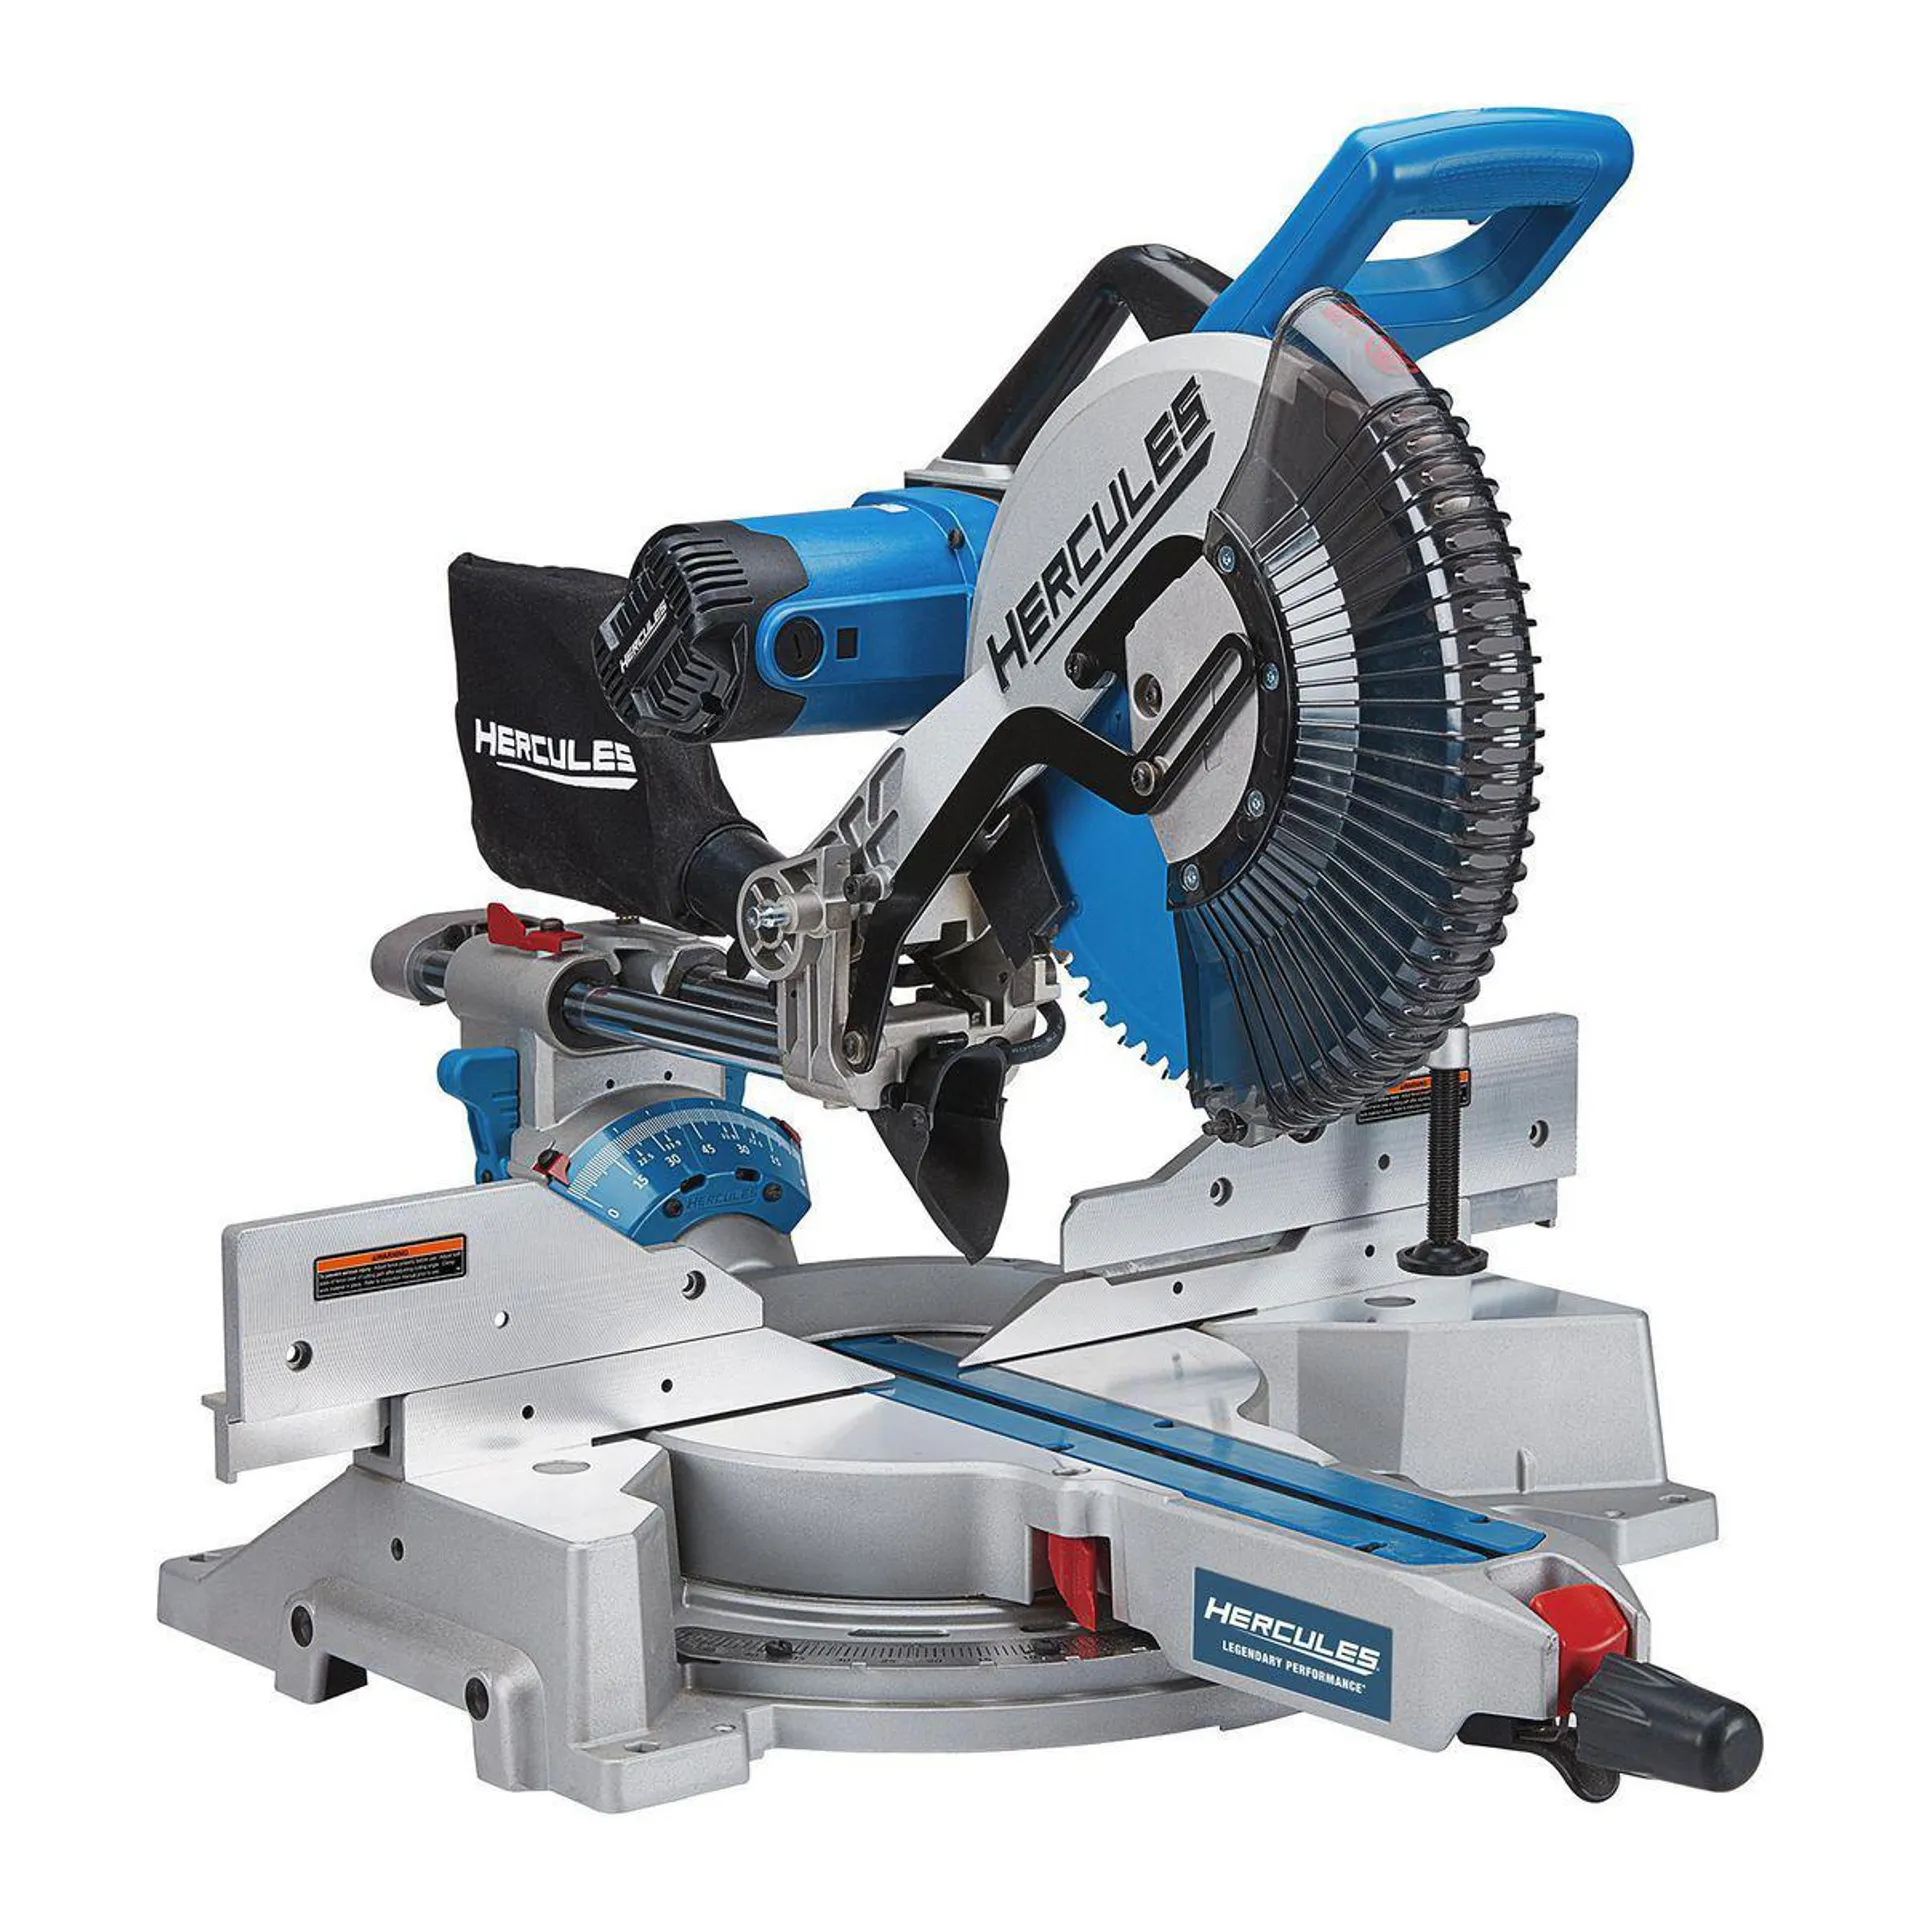 12 in. Dual-Bevel Sliding Compound Miter Saw with Precision LED Shadow Guide